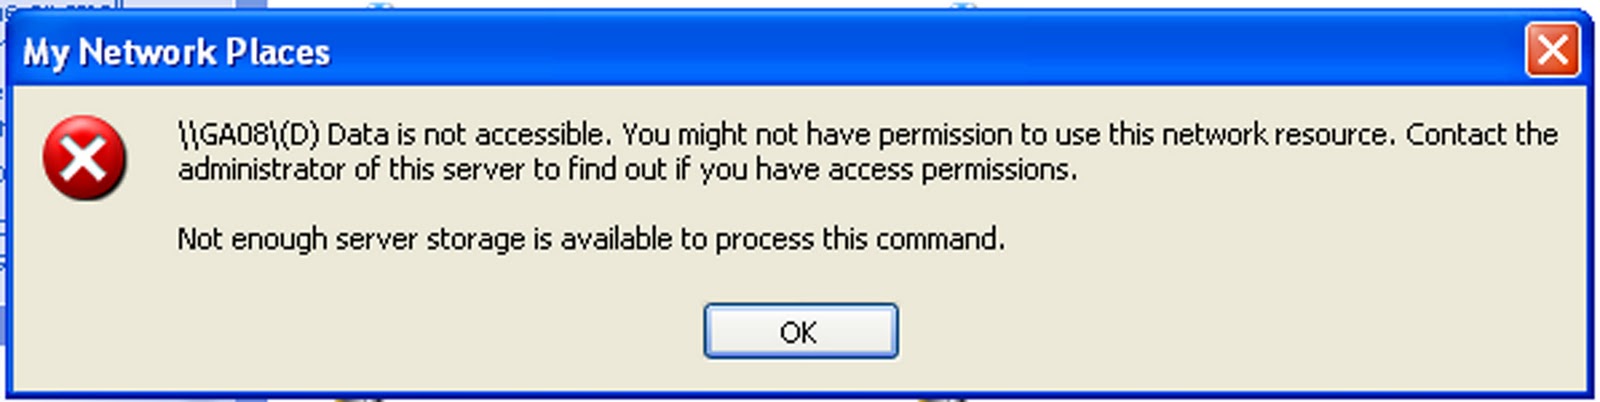 Cannot detect. Unable to detect Graphics environment. You do not have permission to install software. You do not have permission to Run this Command (you need the Music.leave permission).